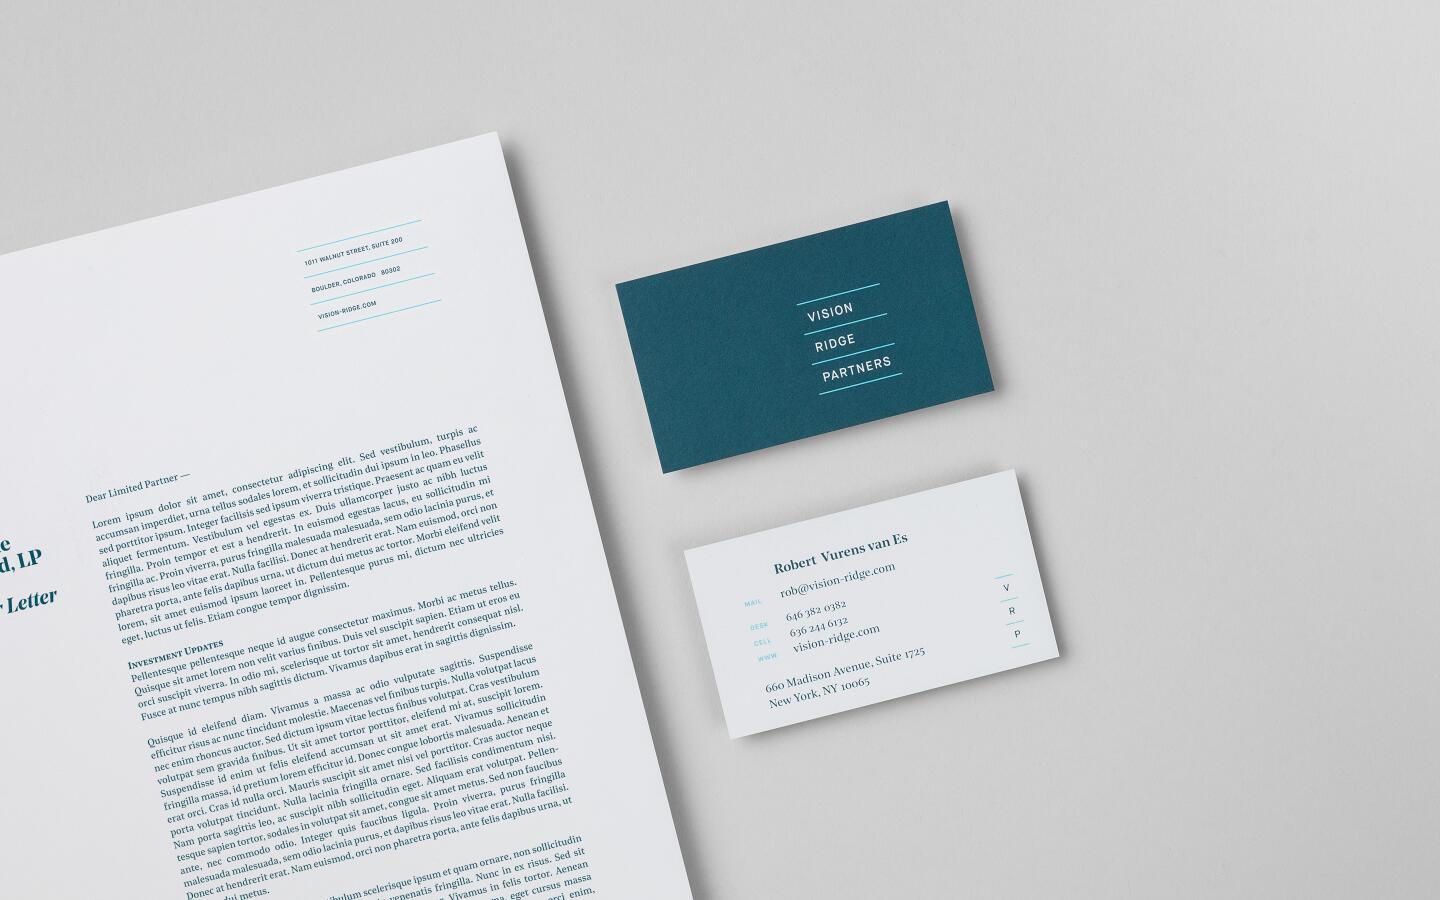 Stationery and two business cards printed with eco-friendly ink